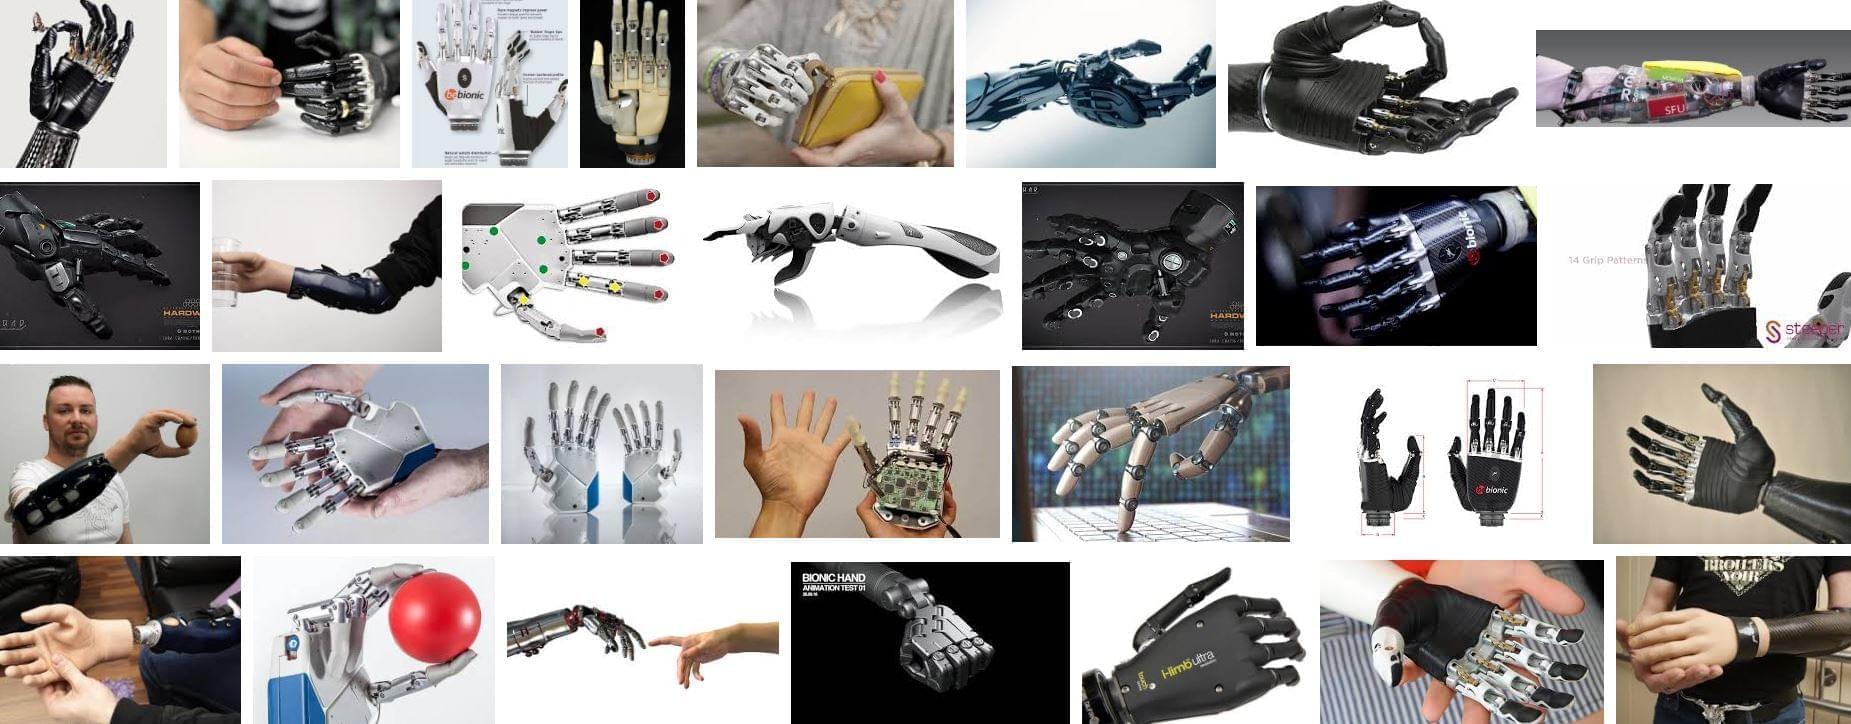 The prosthesis is controlled by the nerve